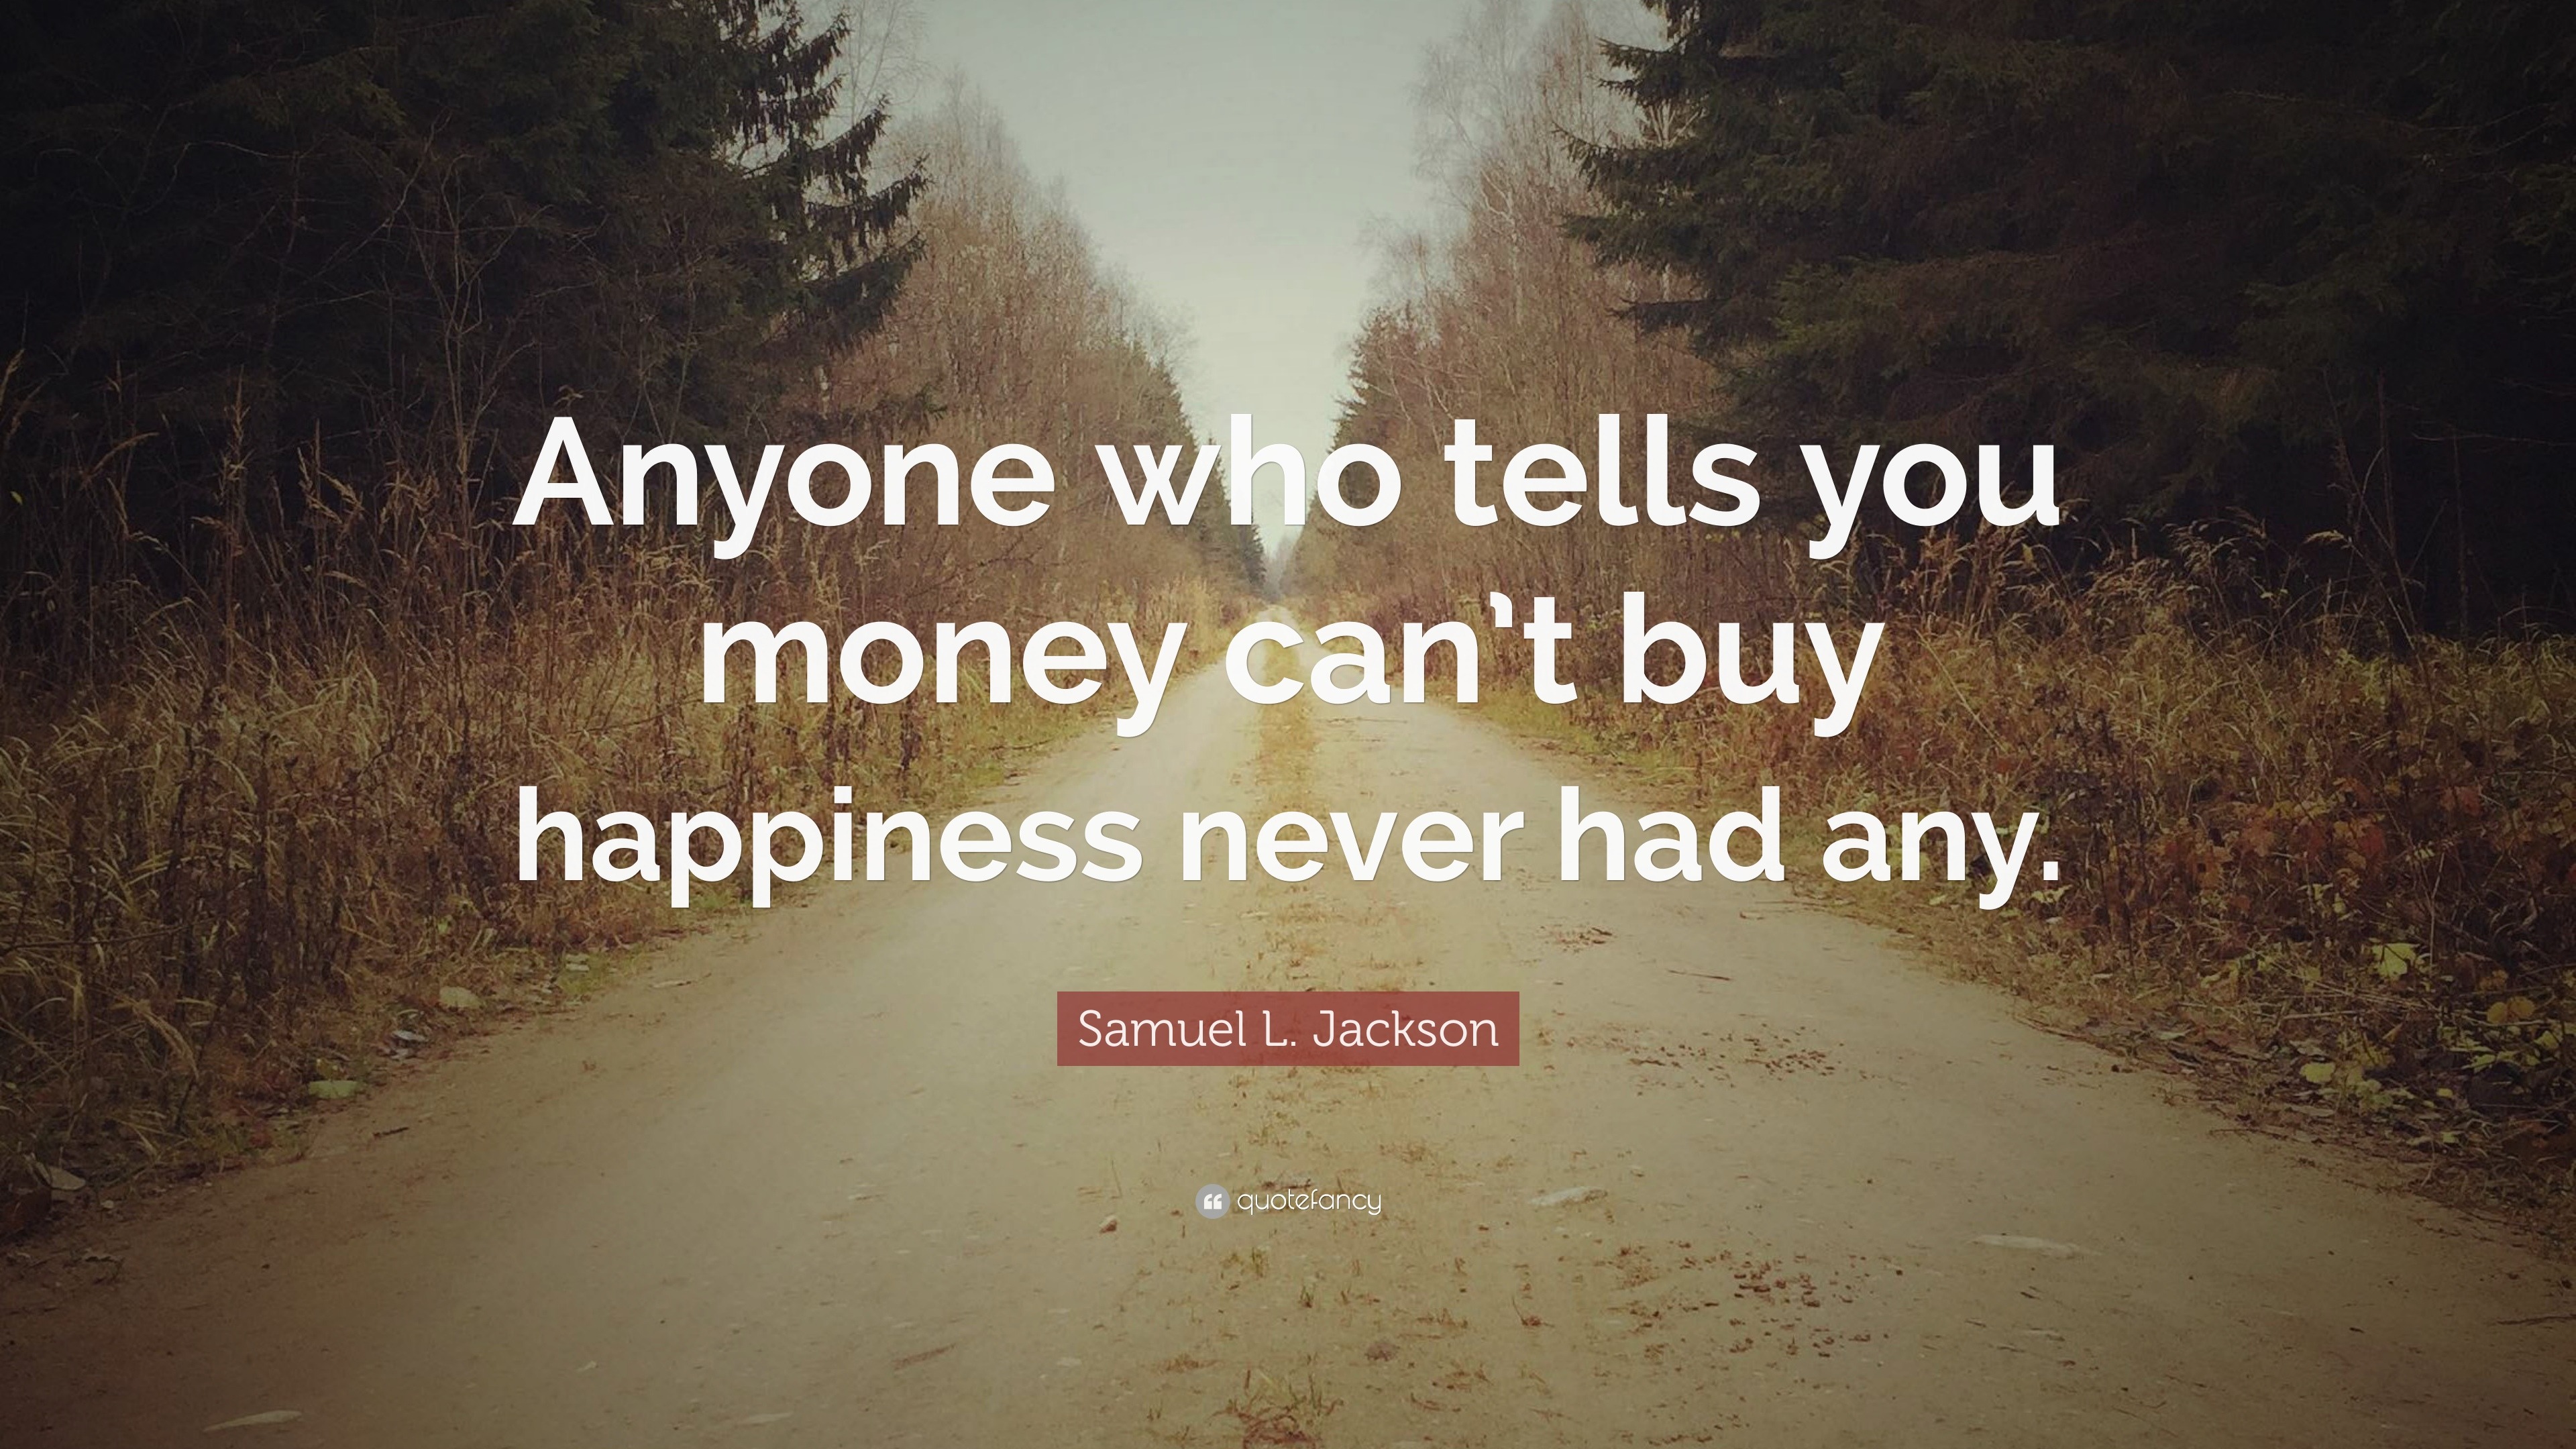 Samuel L Jackson Quote “anyone Who Tells You Money Cant Buy